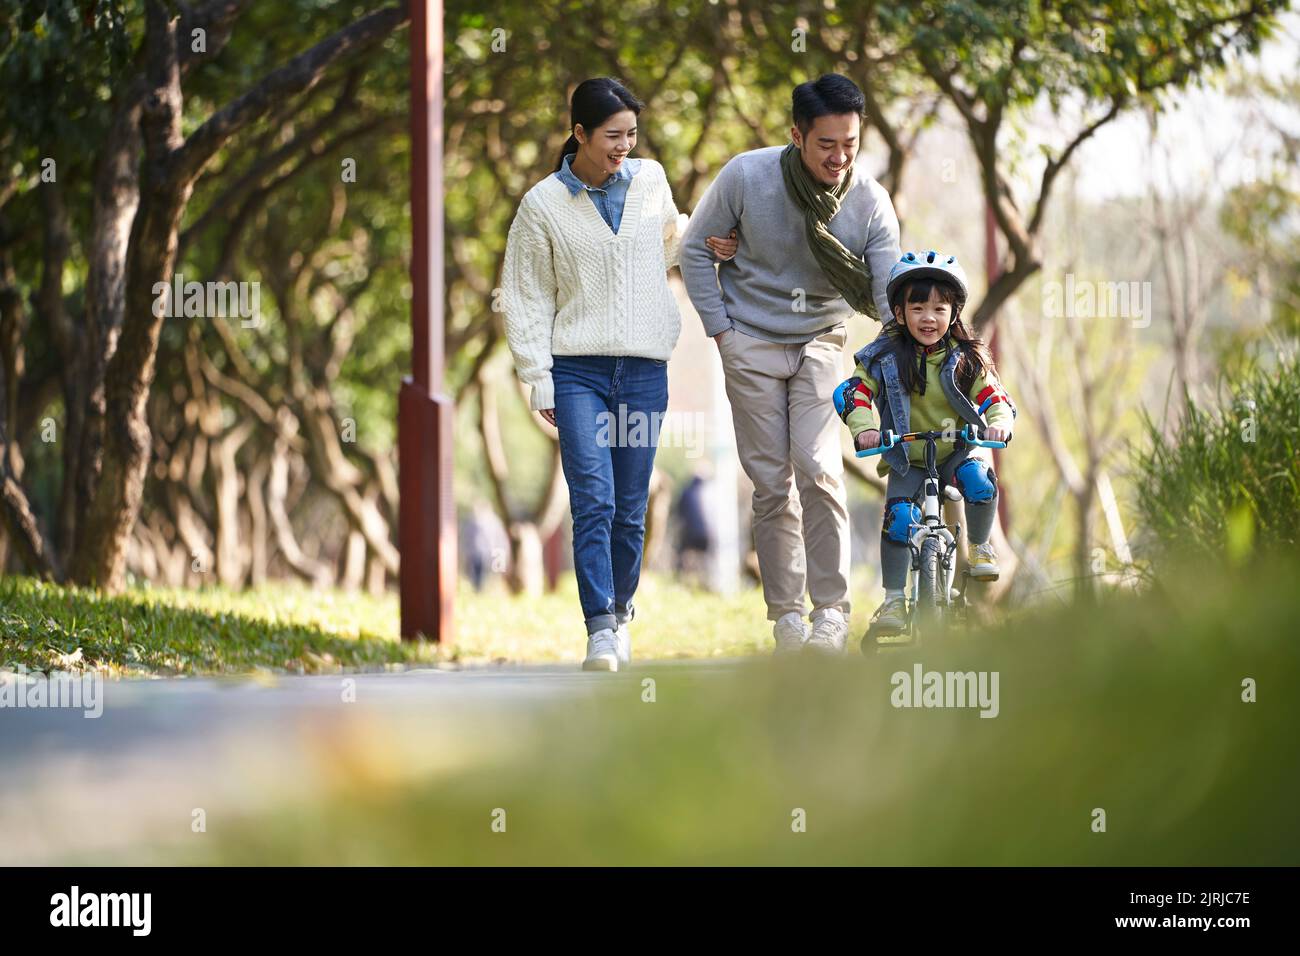 young asian family enjoying outdoor activity in city park Stock Photo